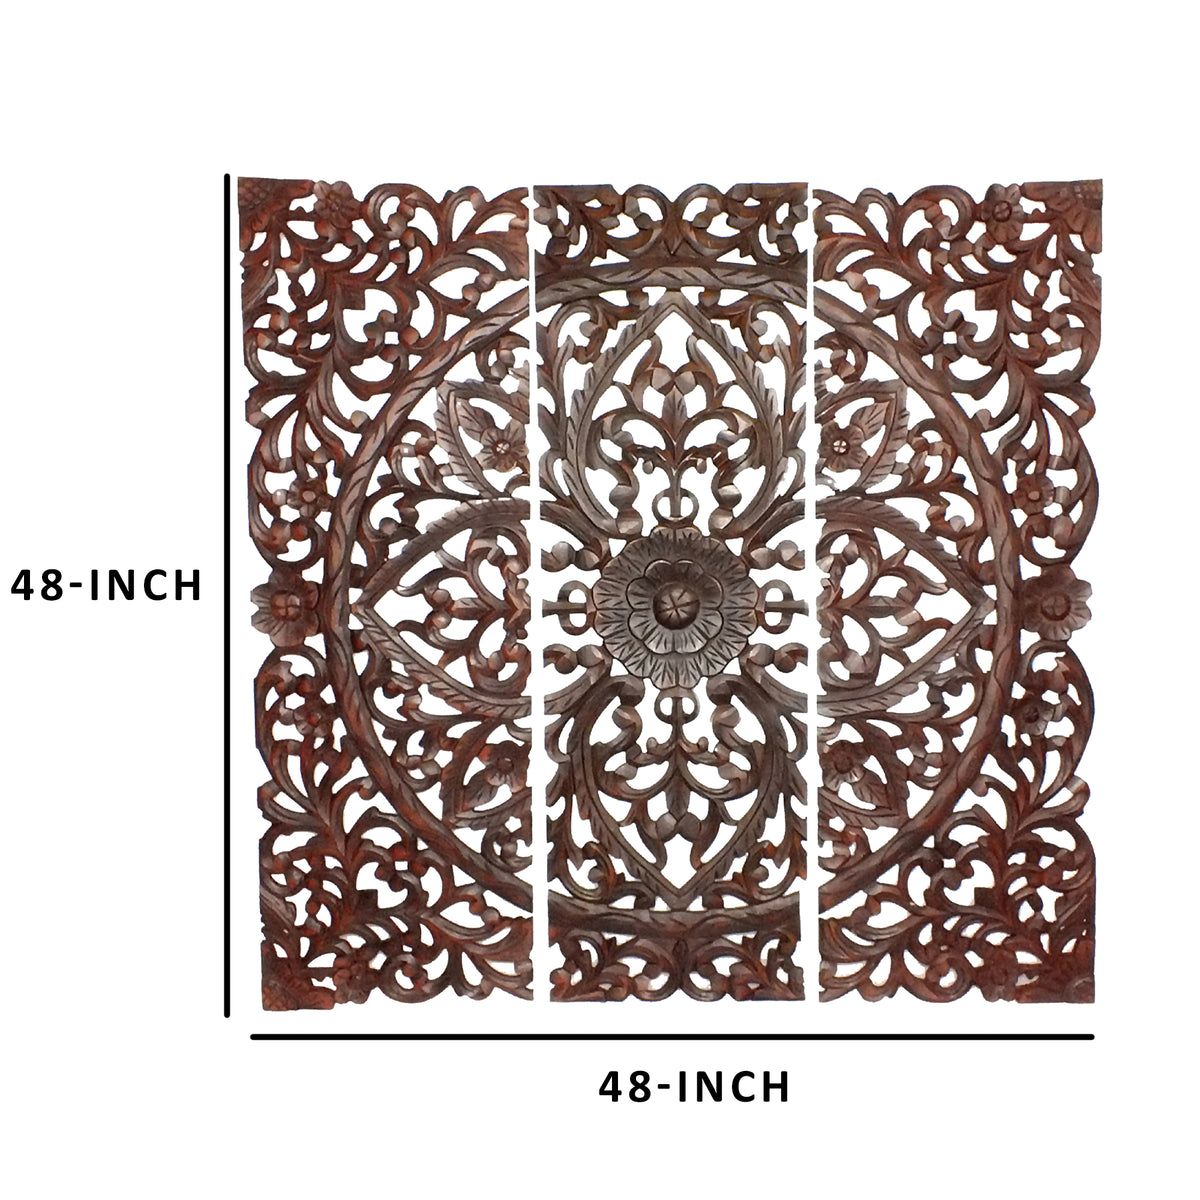 Three Piece Wooden Wall Panel Set with Traditional Scrollwork and Floral Details, Brown - BM00067